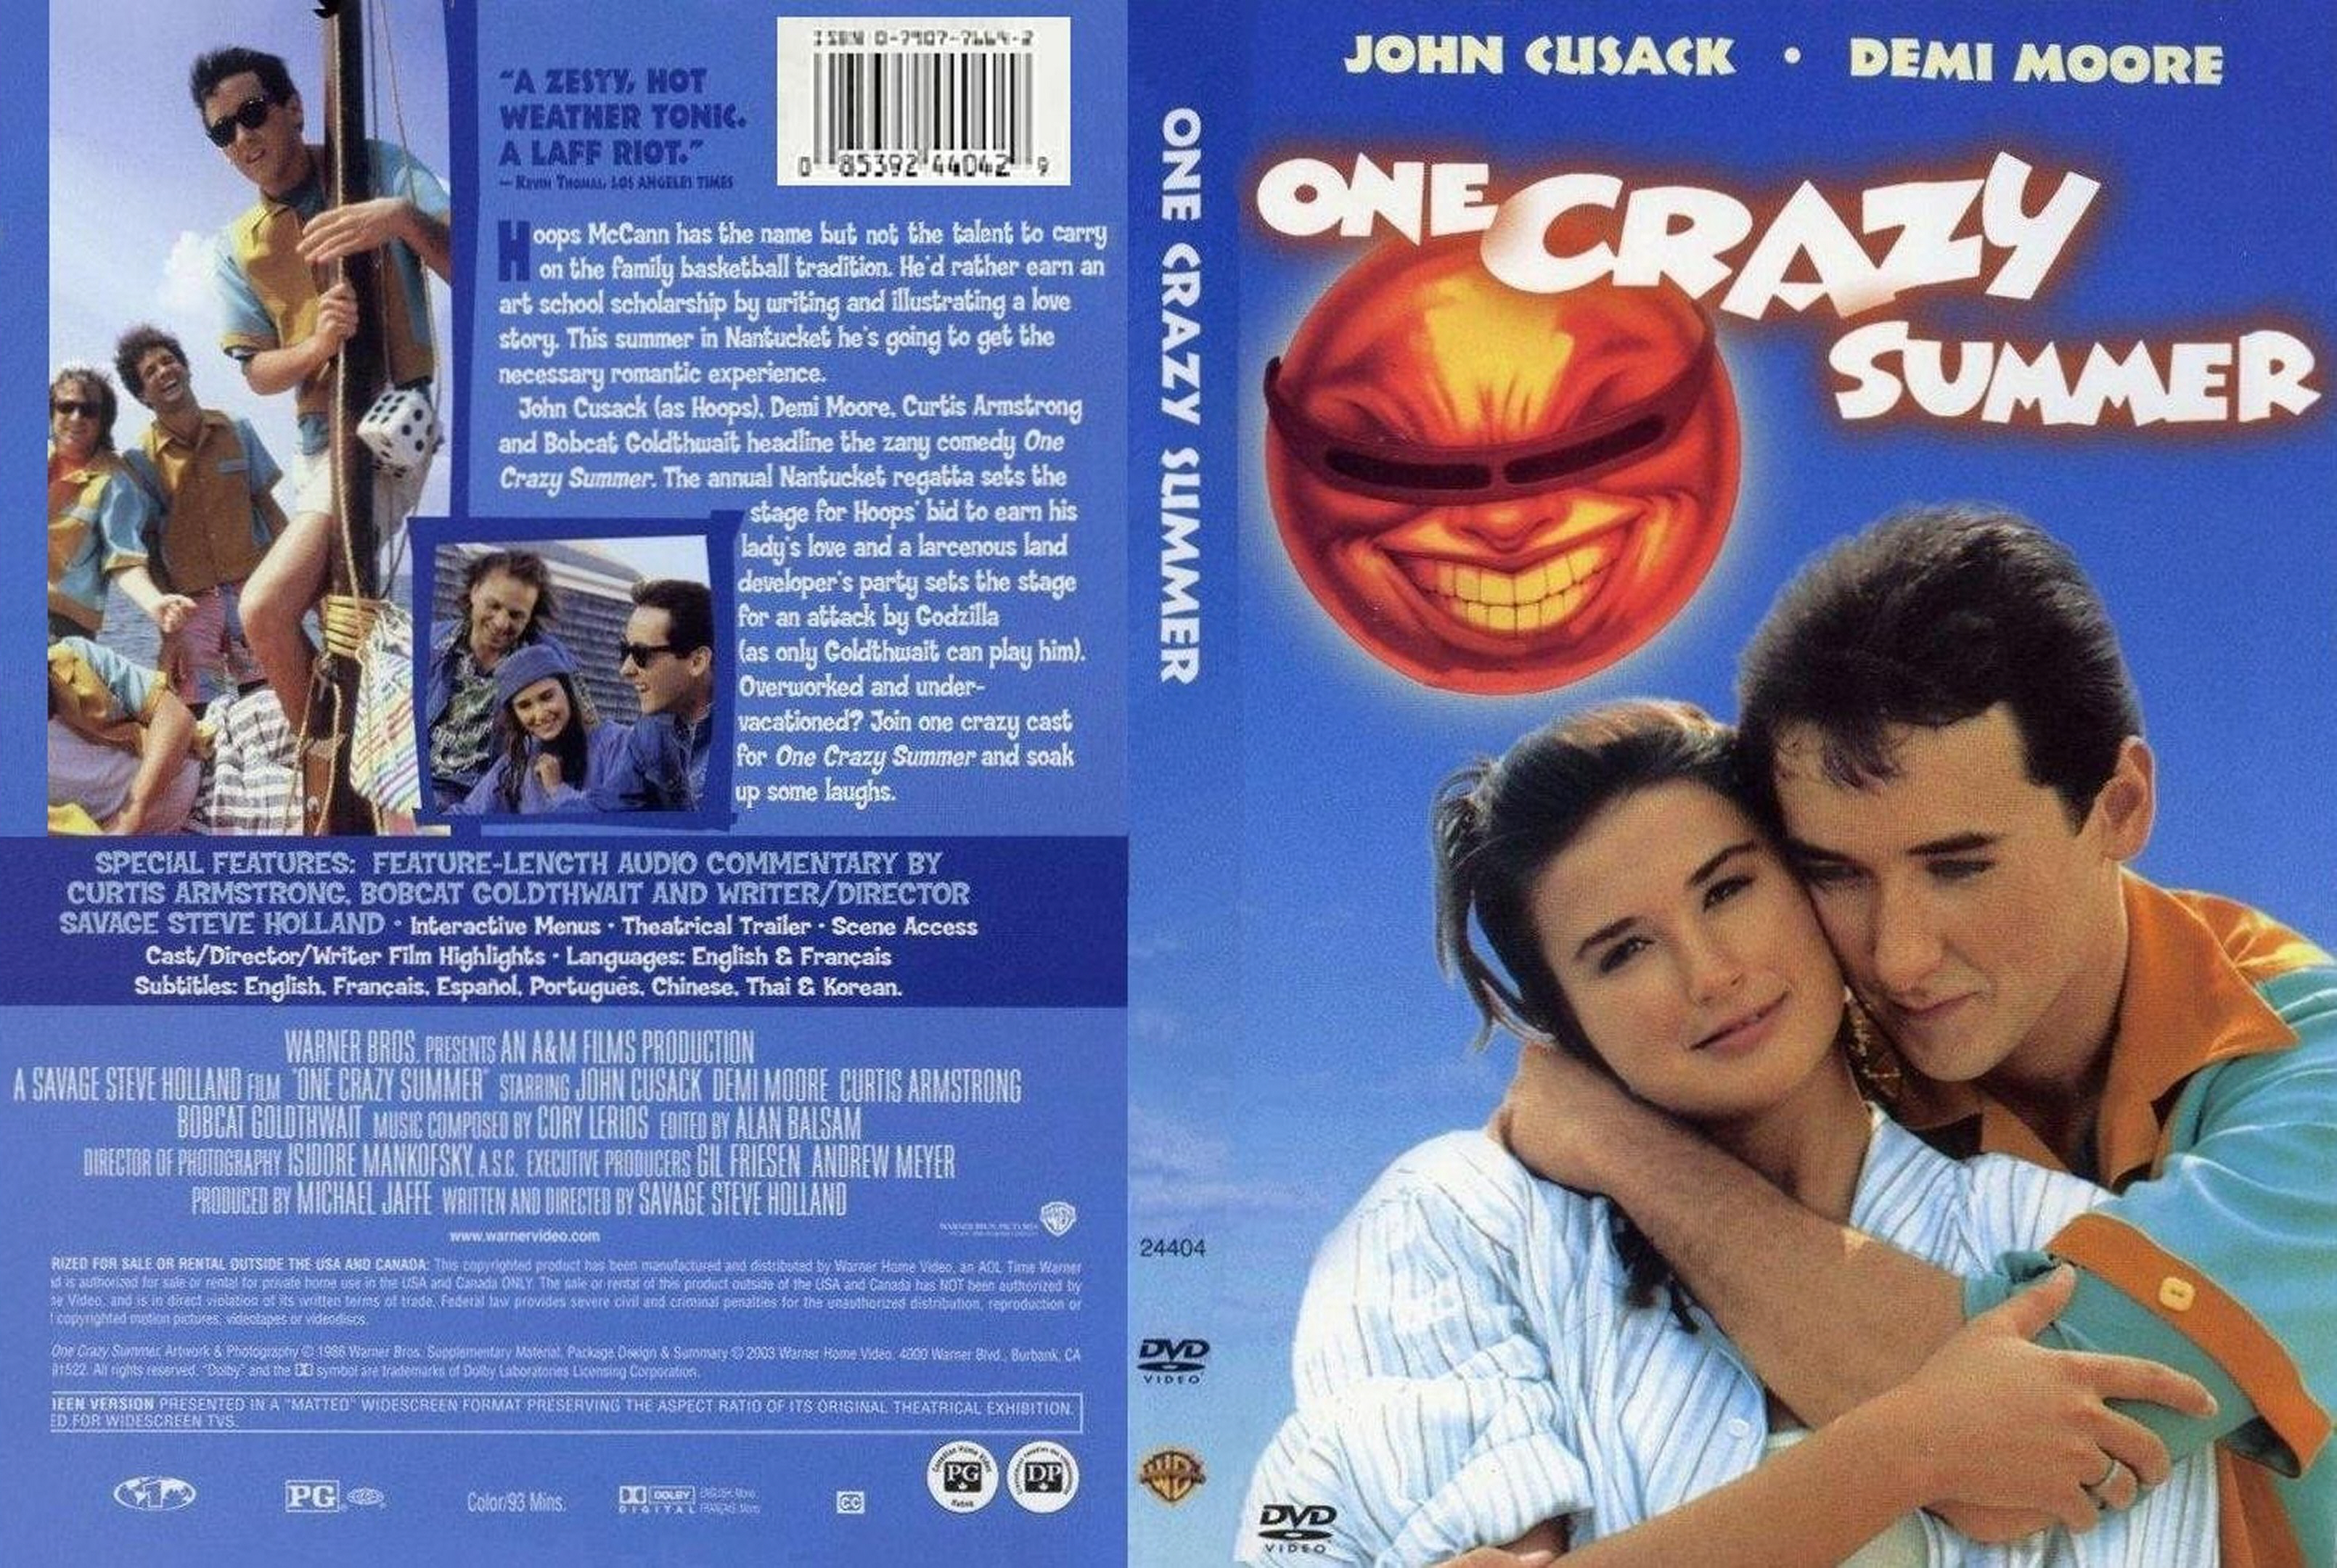 Jaquette DVD One Crazy Summer Zone 1